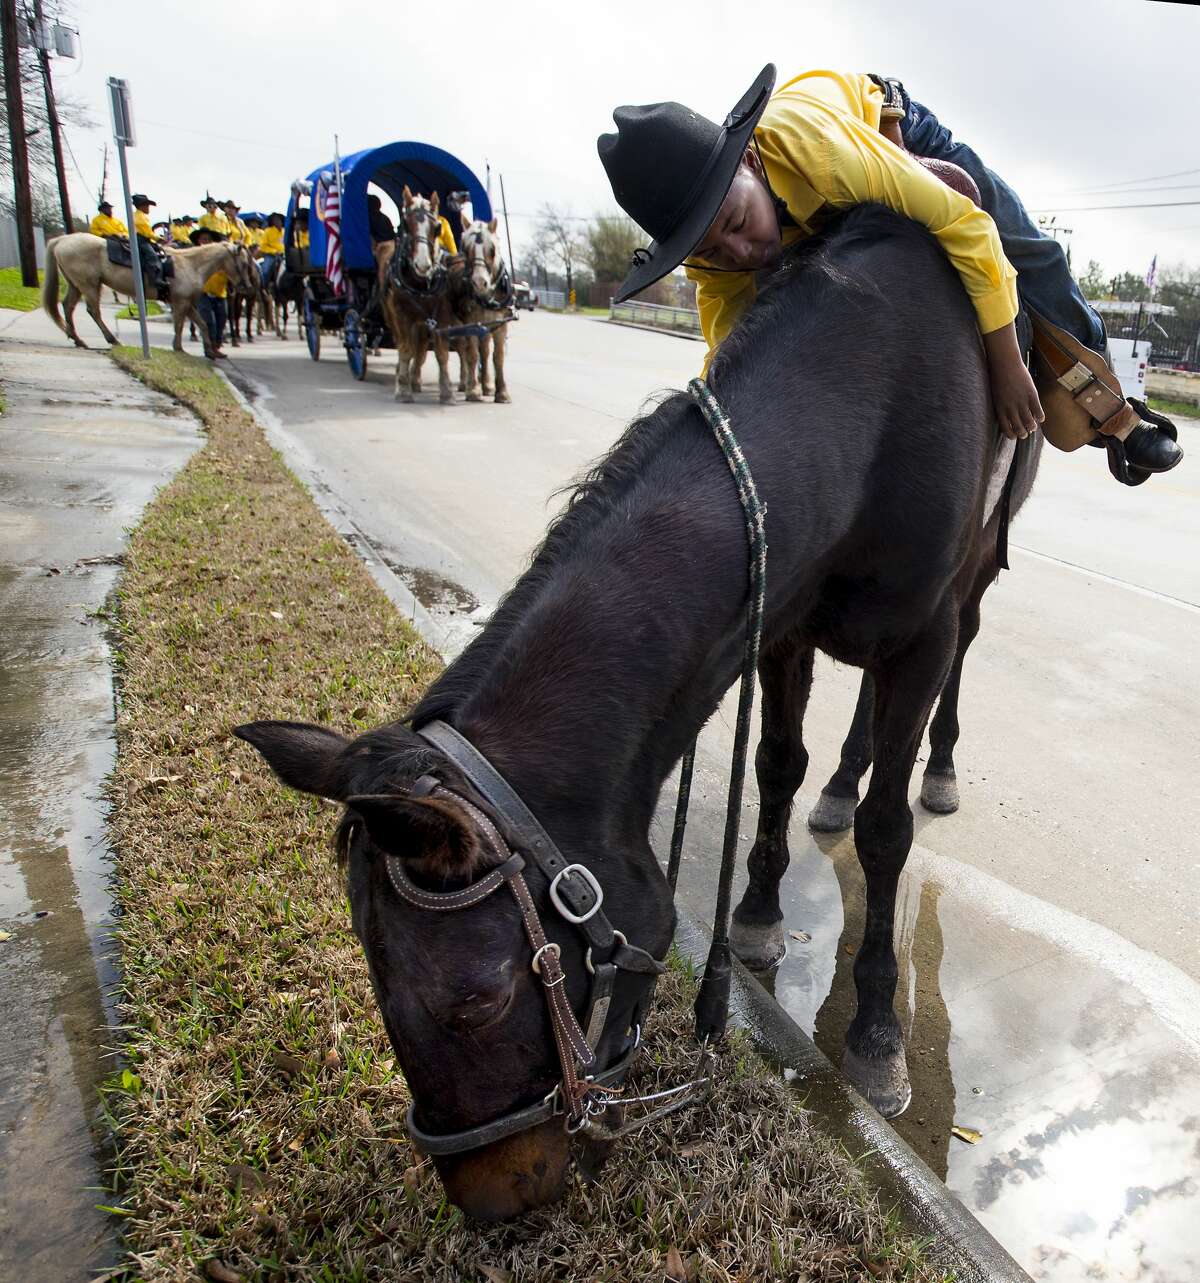 Major Wilson Berthia gives his horse a break to eat some grass as he rides with the Prairie View Trailriders Association along Pinemont as their way toward Memorial Park to on Friday, Feb. 23, 2018, in Houston.